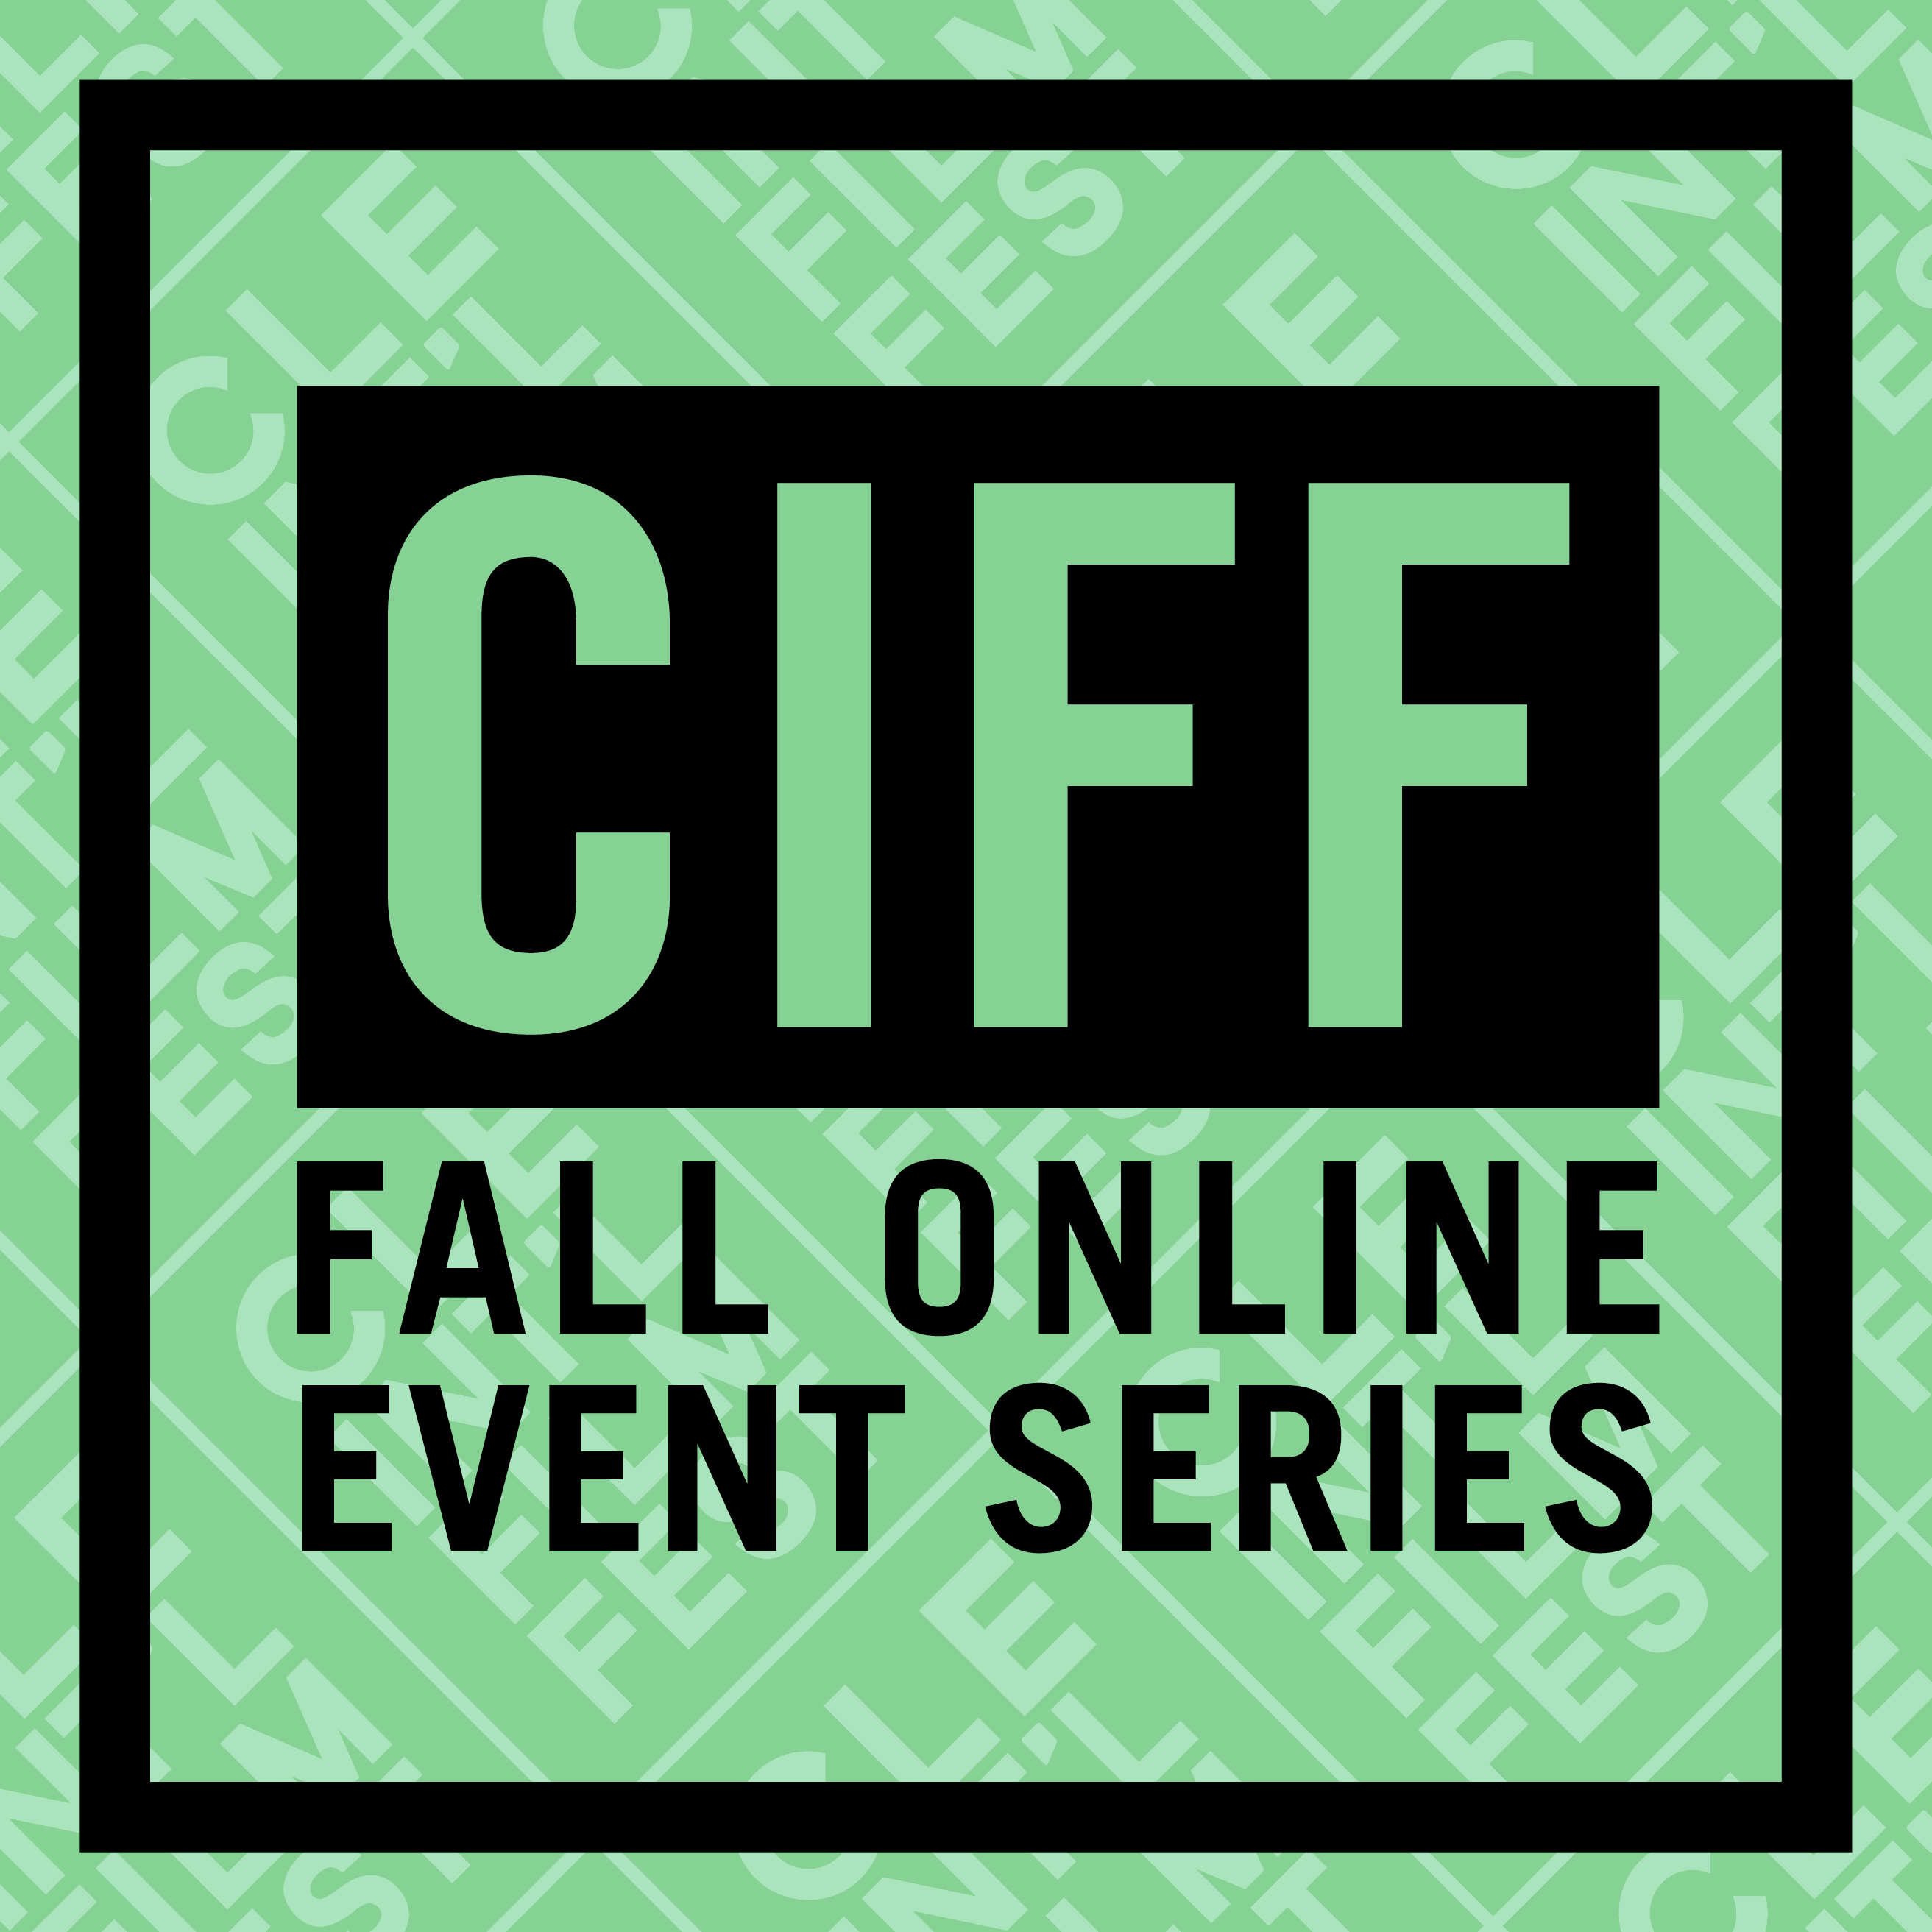 Ciff Event And Talk Programme